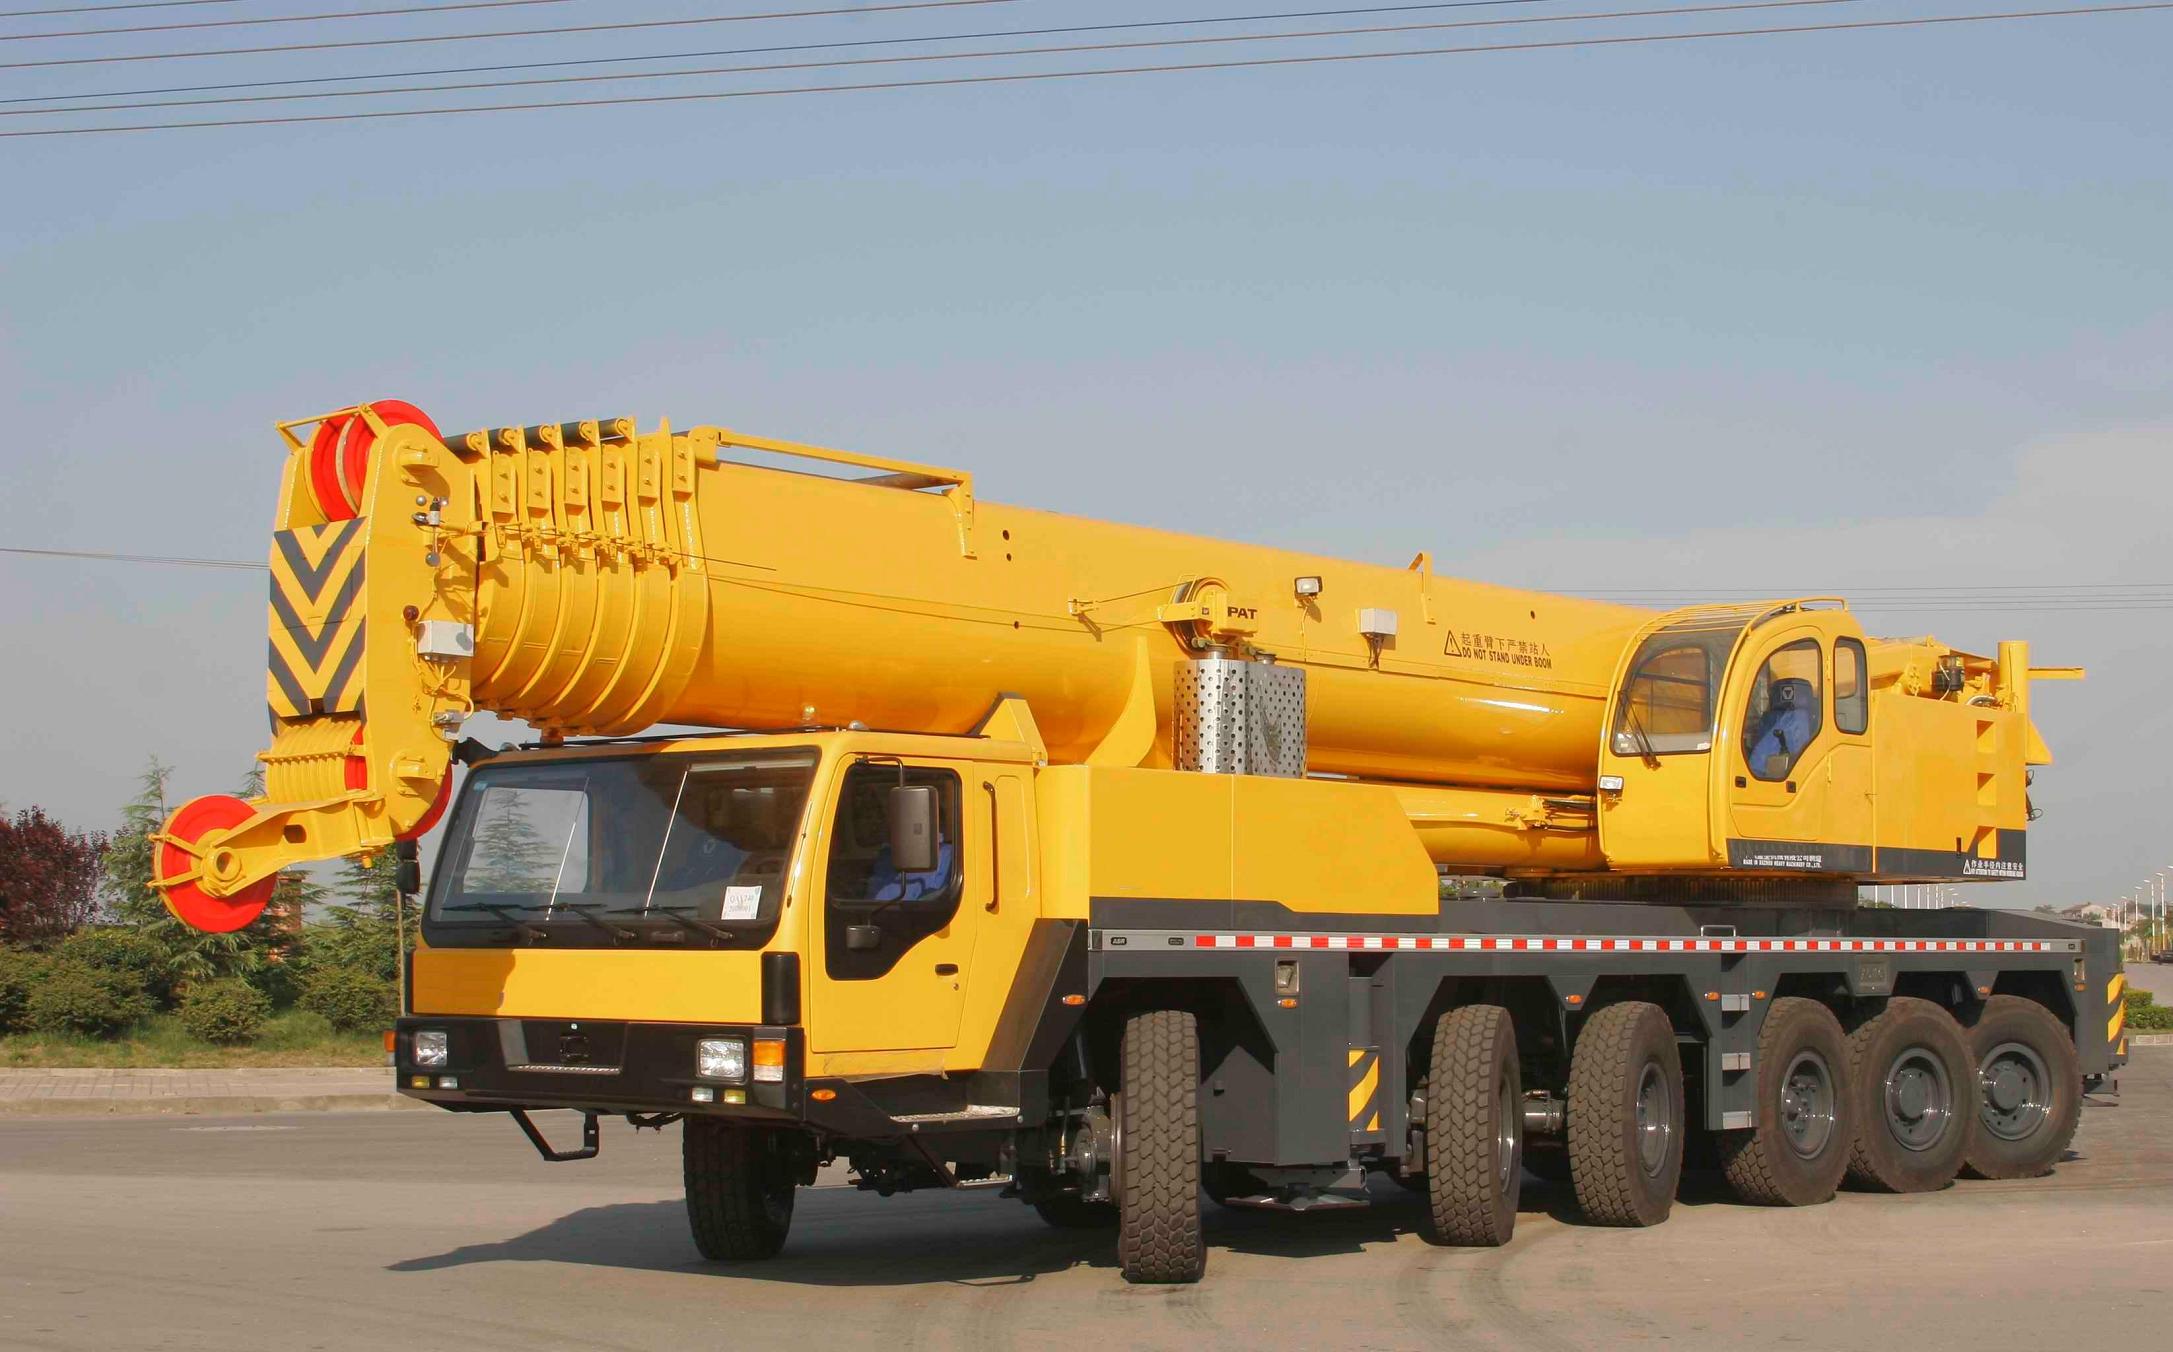 What Do You Need To Know About All Terrain Cranes? - Part 1